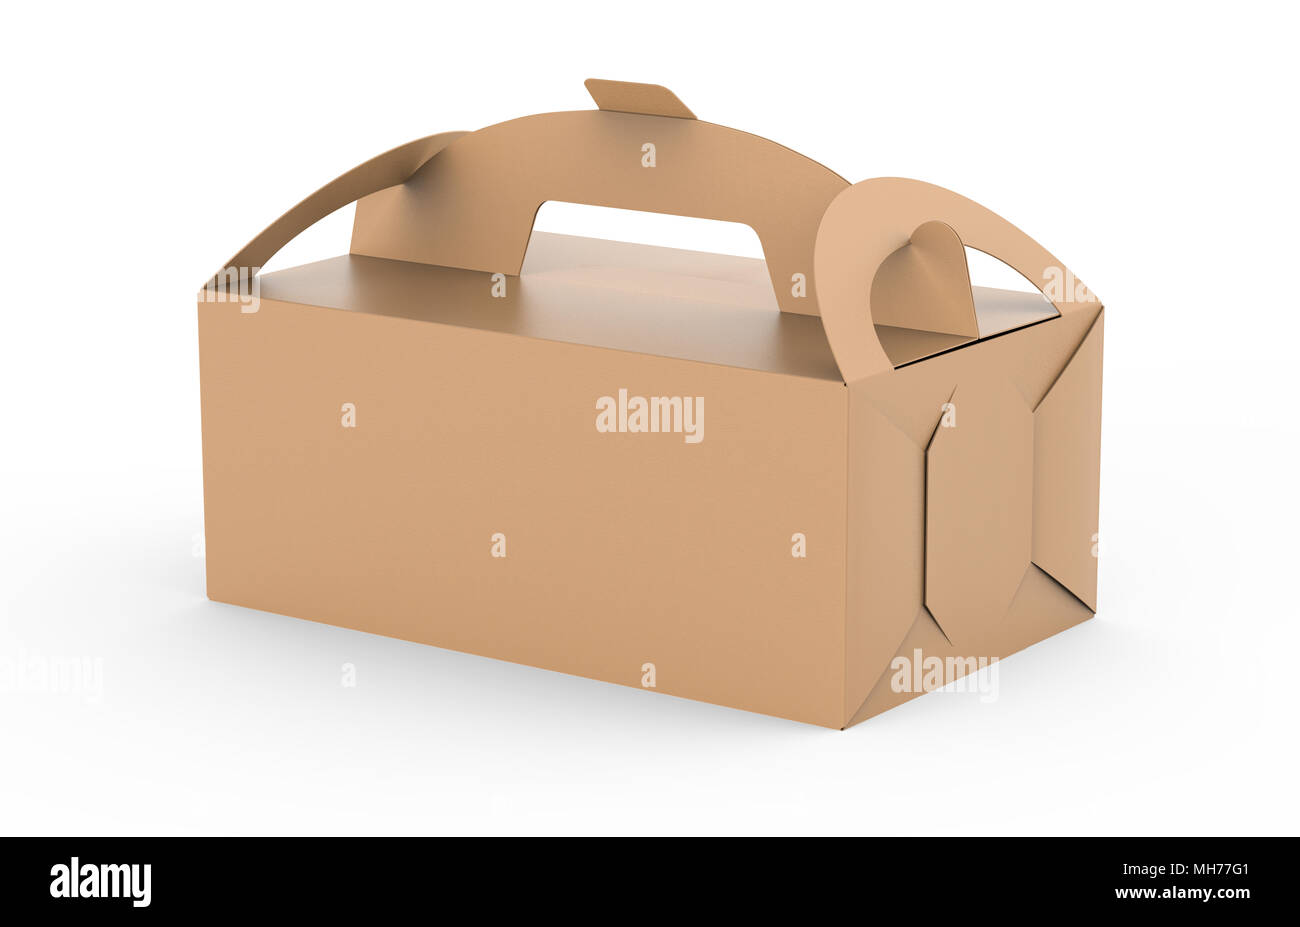 Kraft box with handle, gift or food carton package in 3d render for design uses Stock Photo